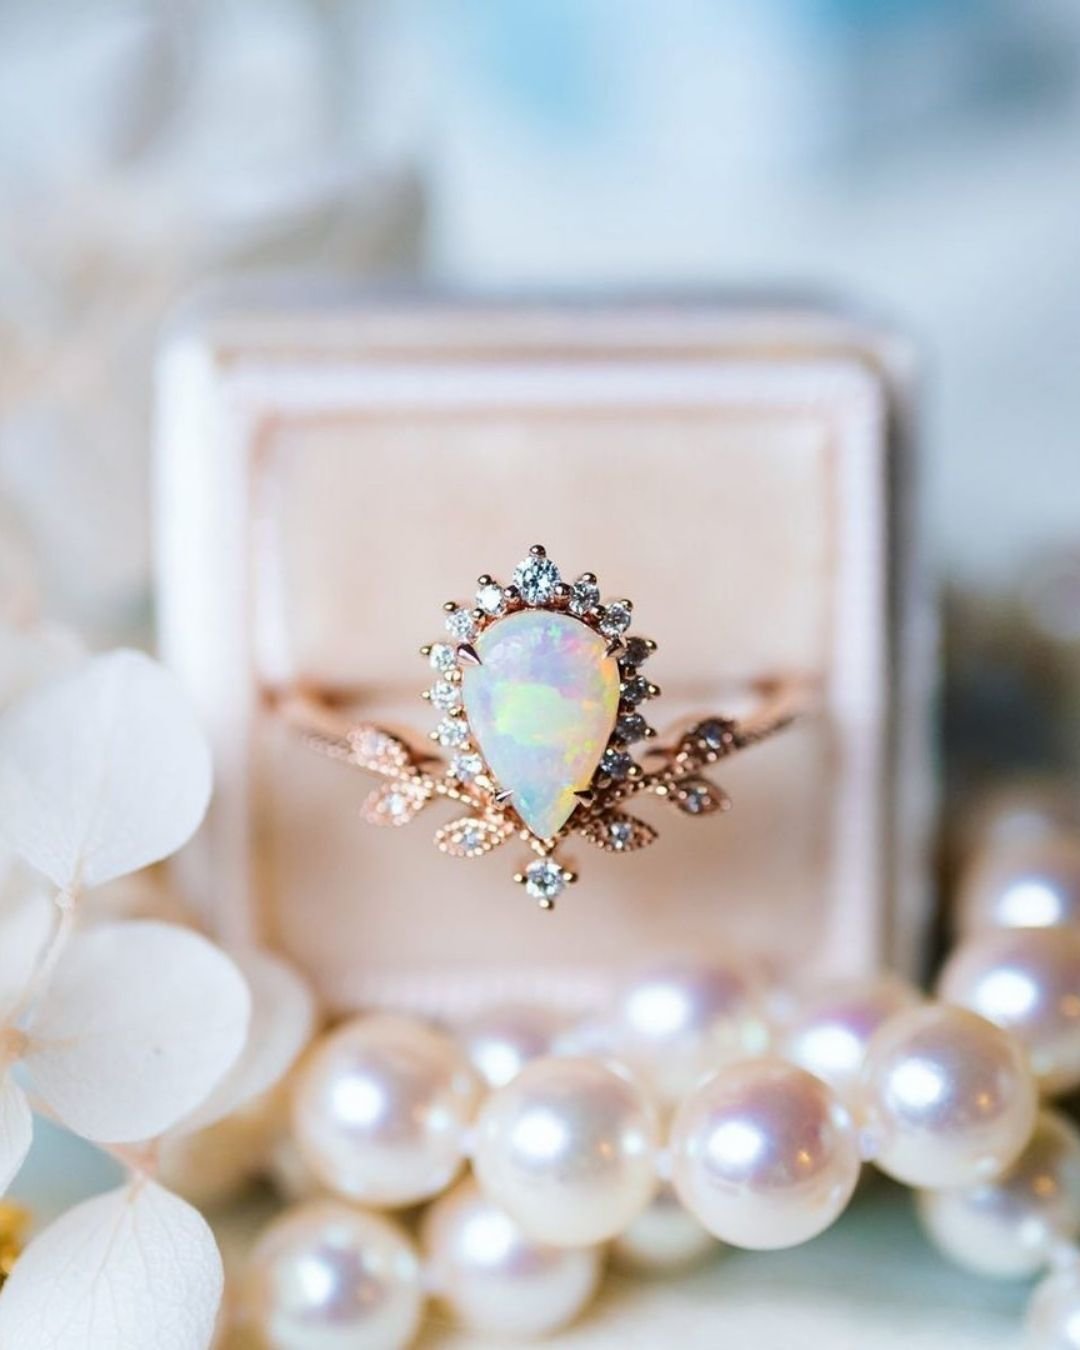 rose gold wedding rings with opal gems1